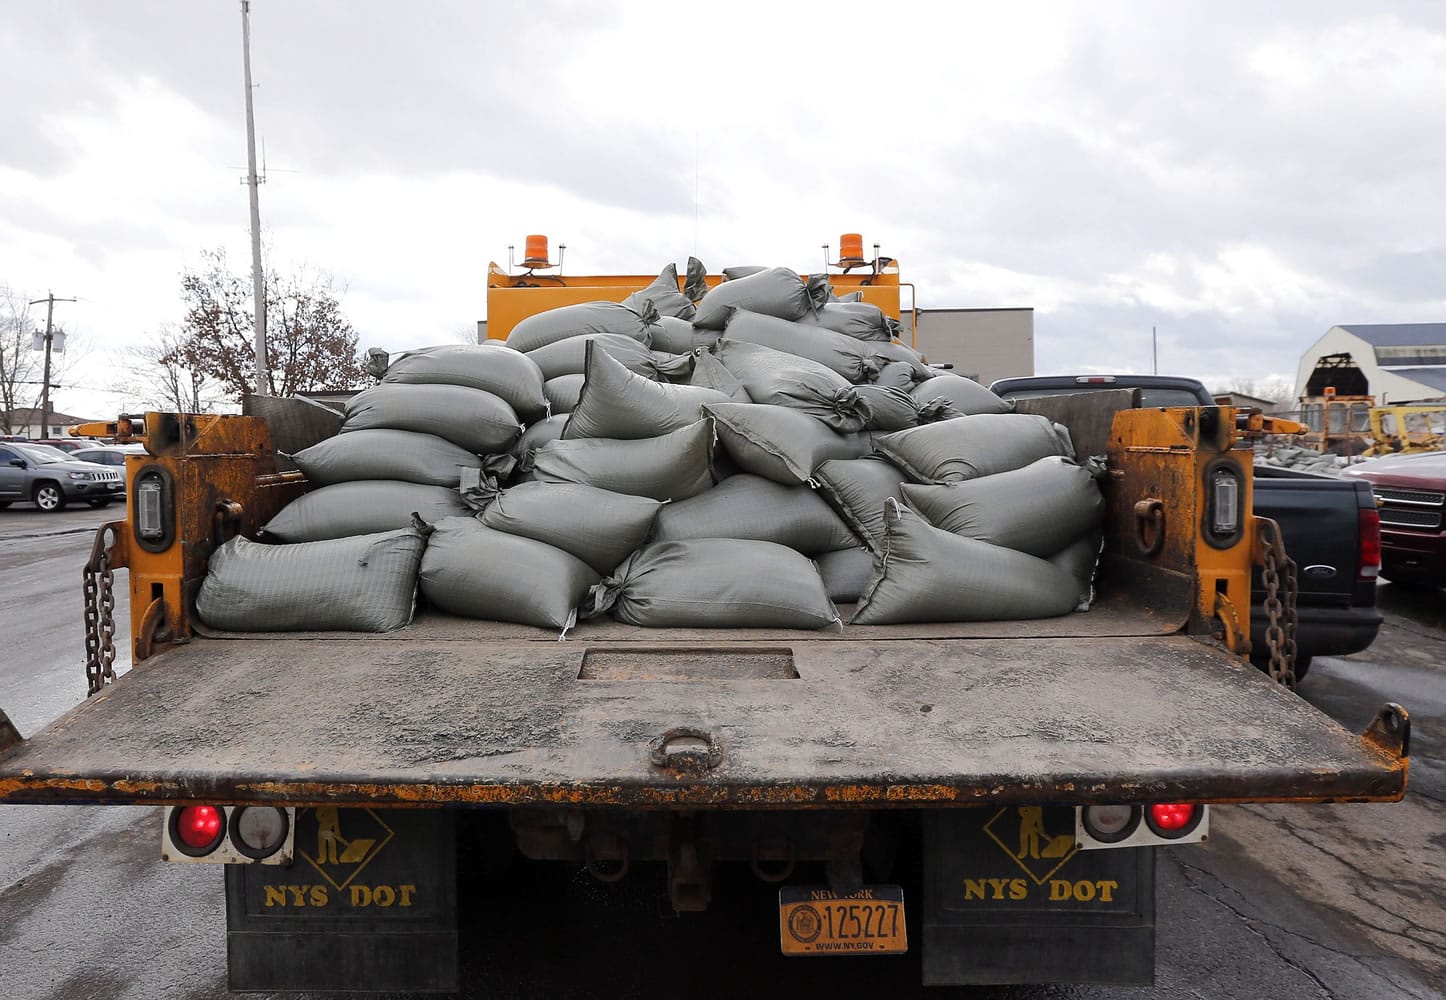 Sand bags are piled on a truck at the West Seneca Highway Department on Monday in West Seneca, N.Y., that were prepared for deployment for potential flooding from melting snow after last week's lake-effect snowstorms.